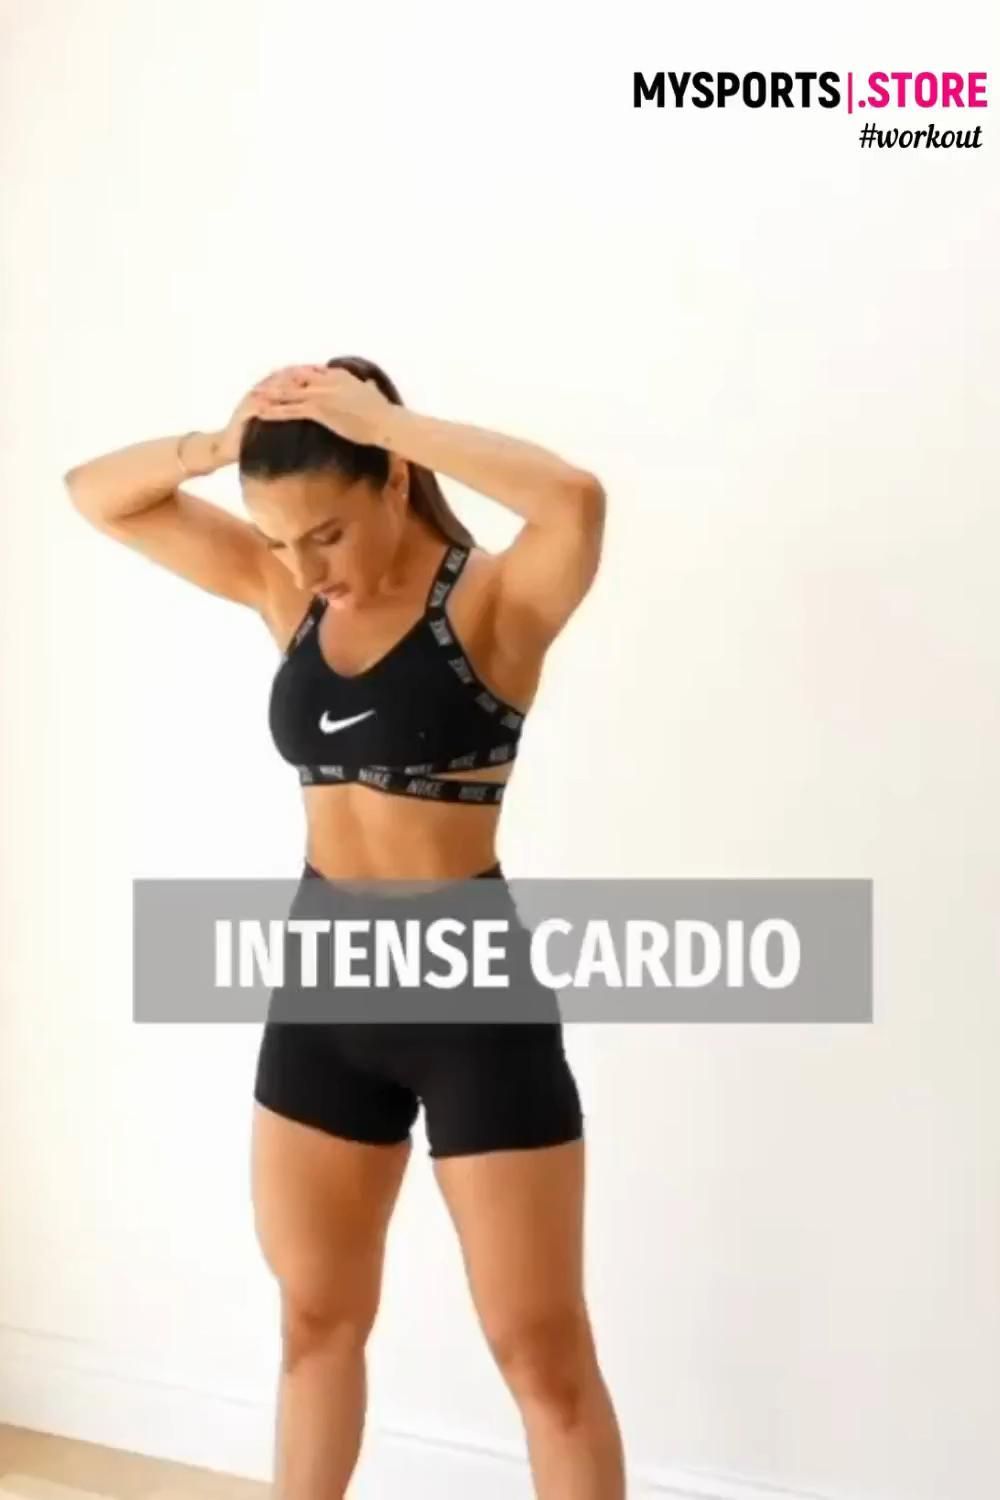 INTENSE CARDIO AND I MEAN INTENSEEE | Activewear for your workout | Click link - INTENSE CARDIO AND I MEAN INTENSEEE | Activewear for your workout | Click link -   24 fitness Videos ejercicios ideas